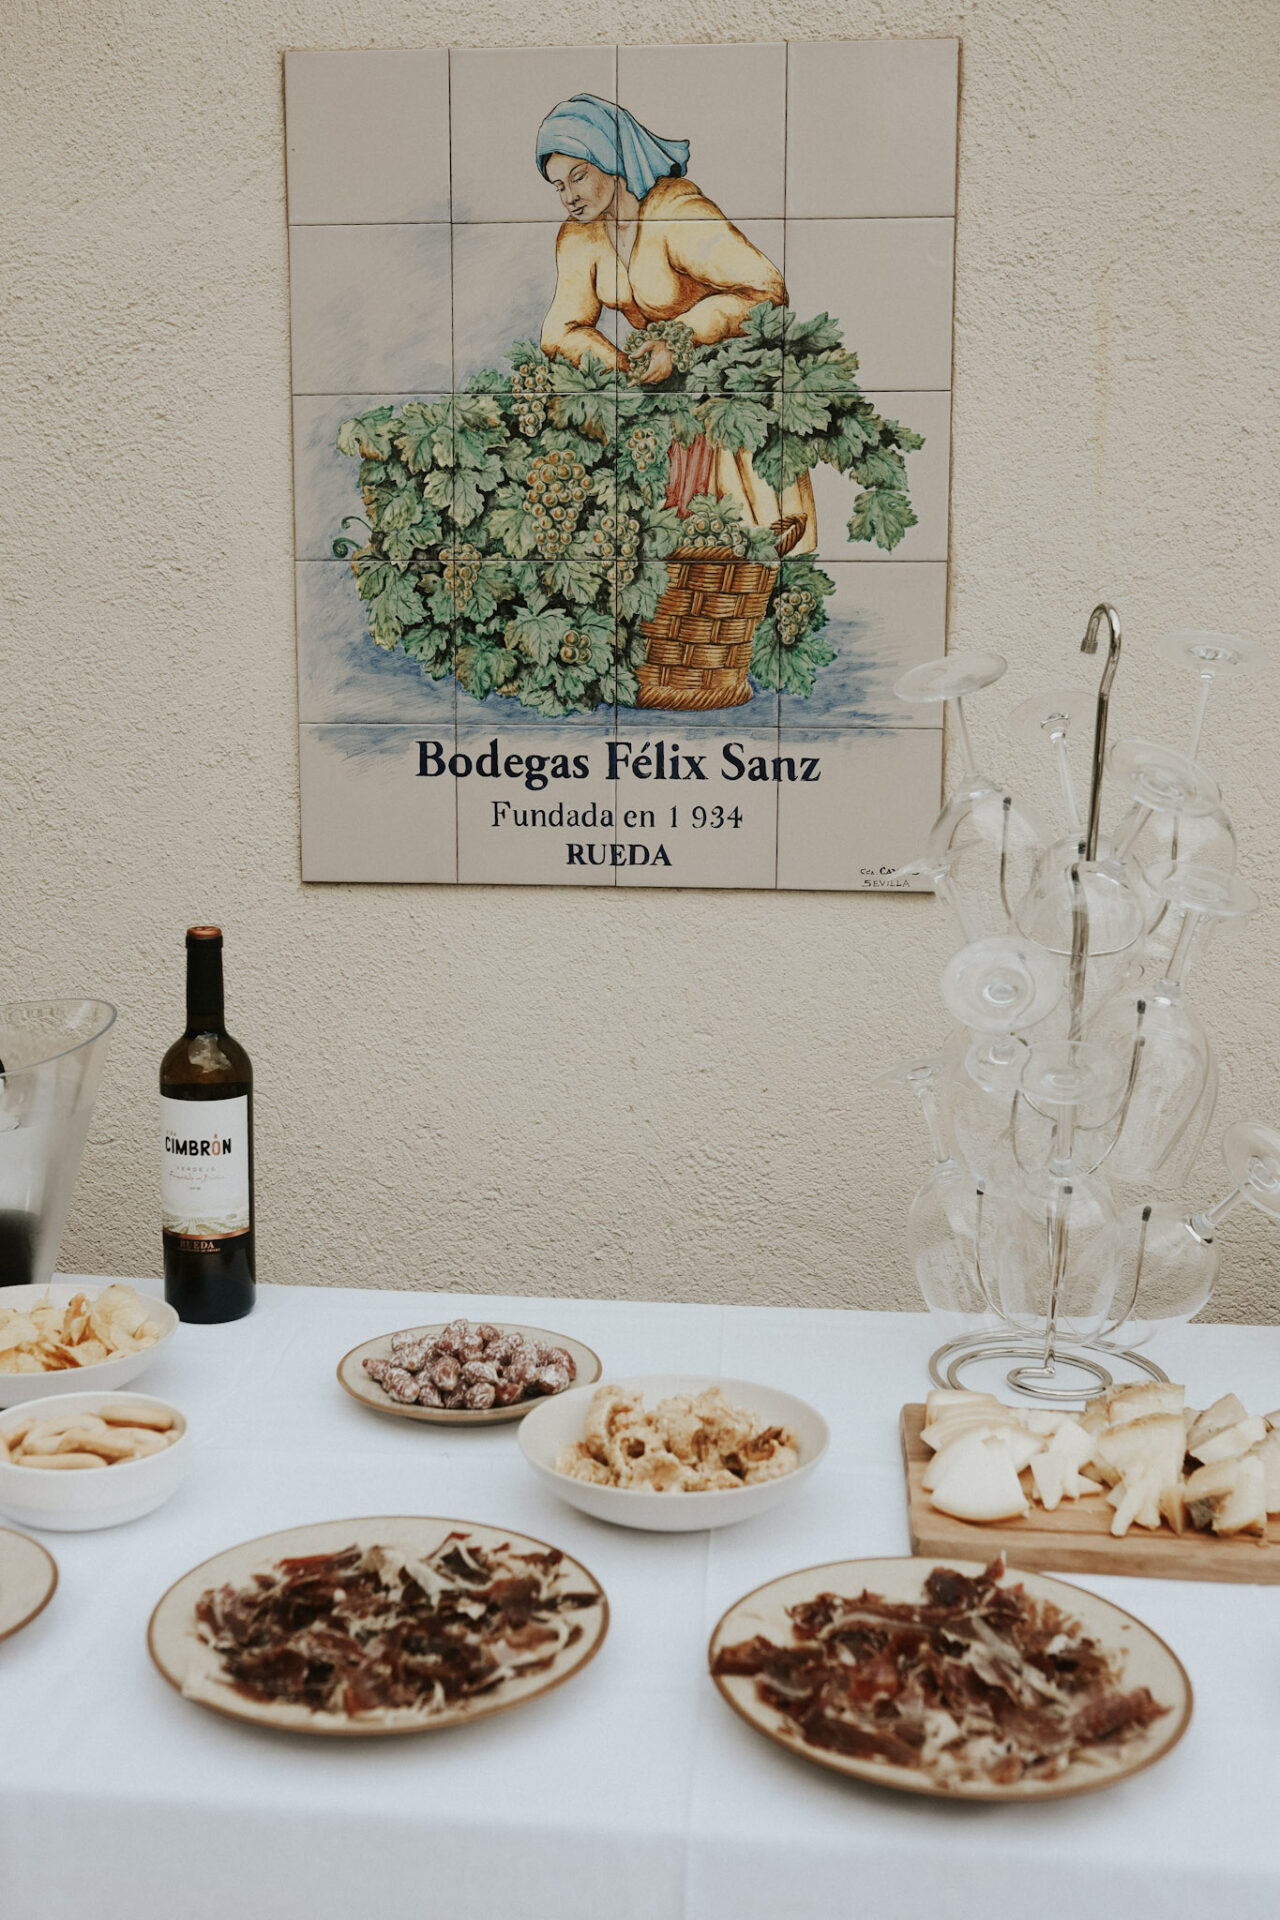 Bodegas Félix Sanz sign and food and wine